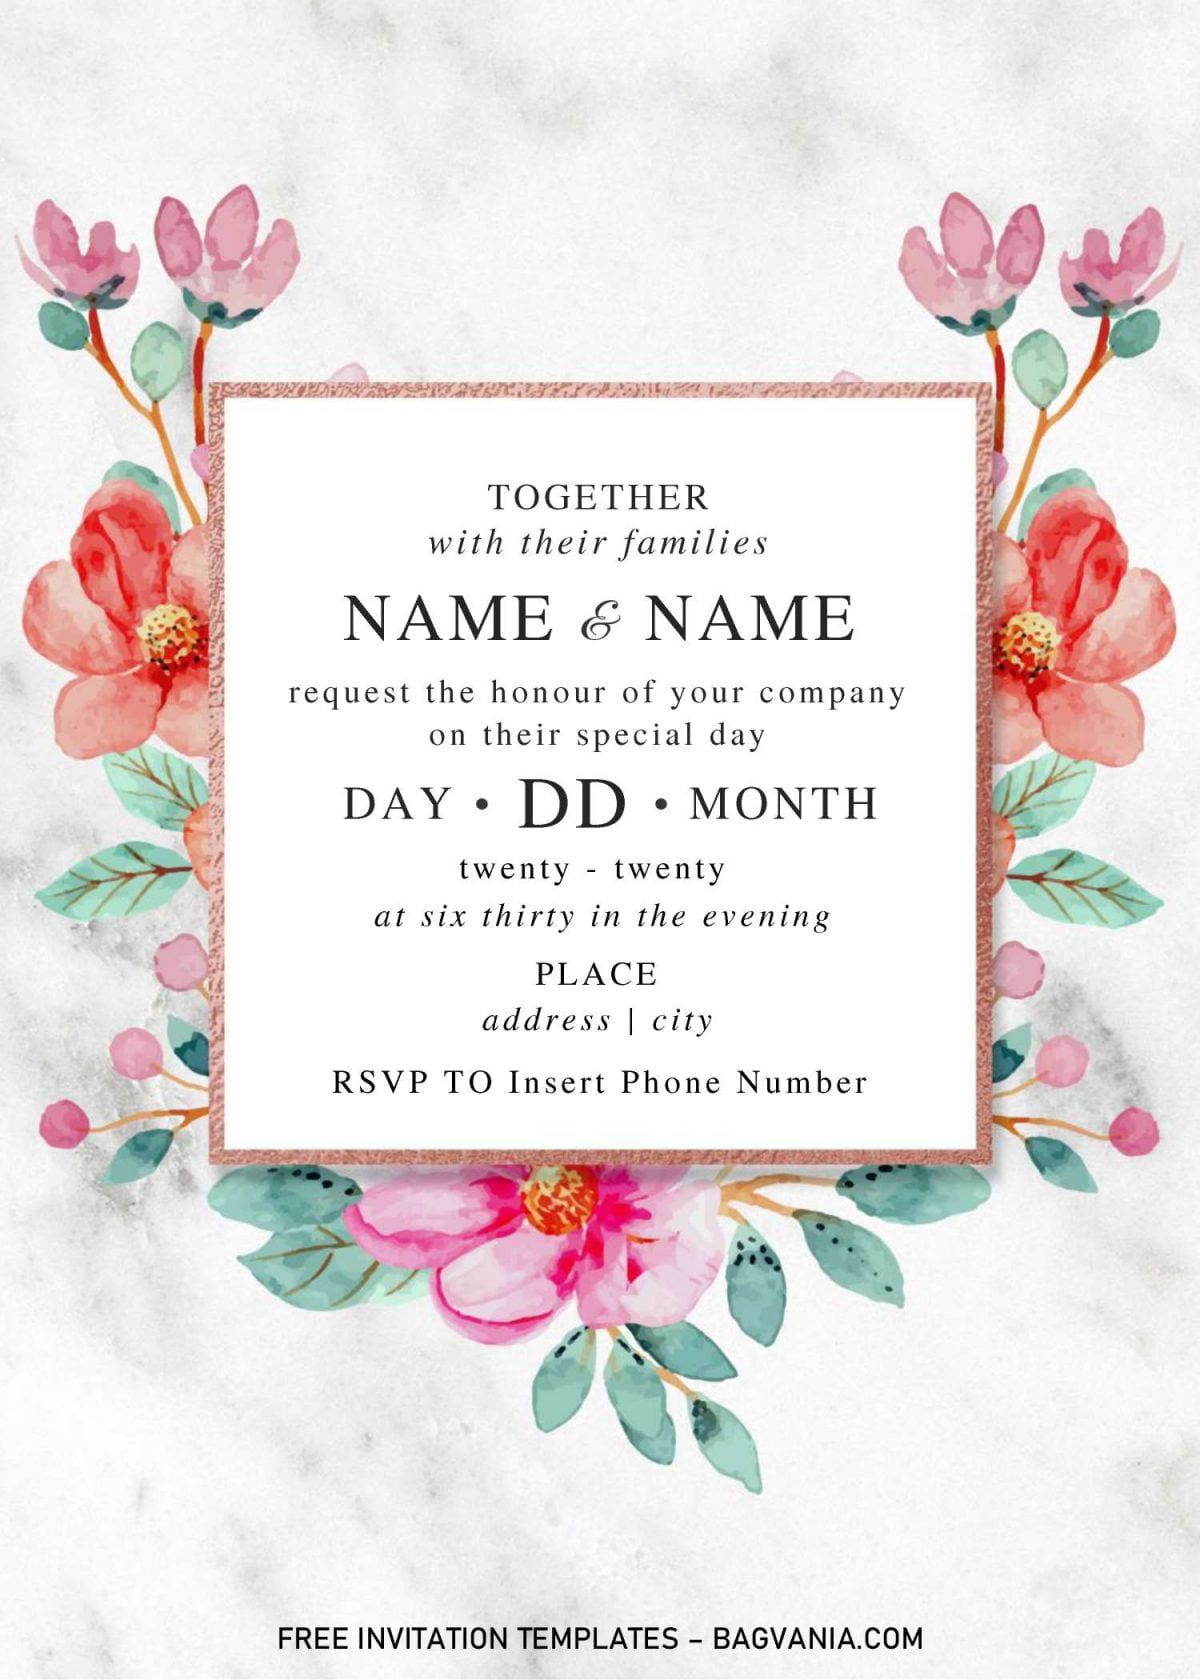 Festive Floral Wedding Invitation Templates - Editable With Microsoft Word and has watercolor flowers